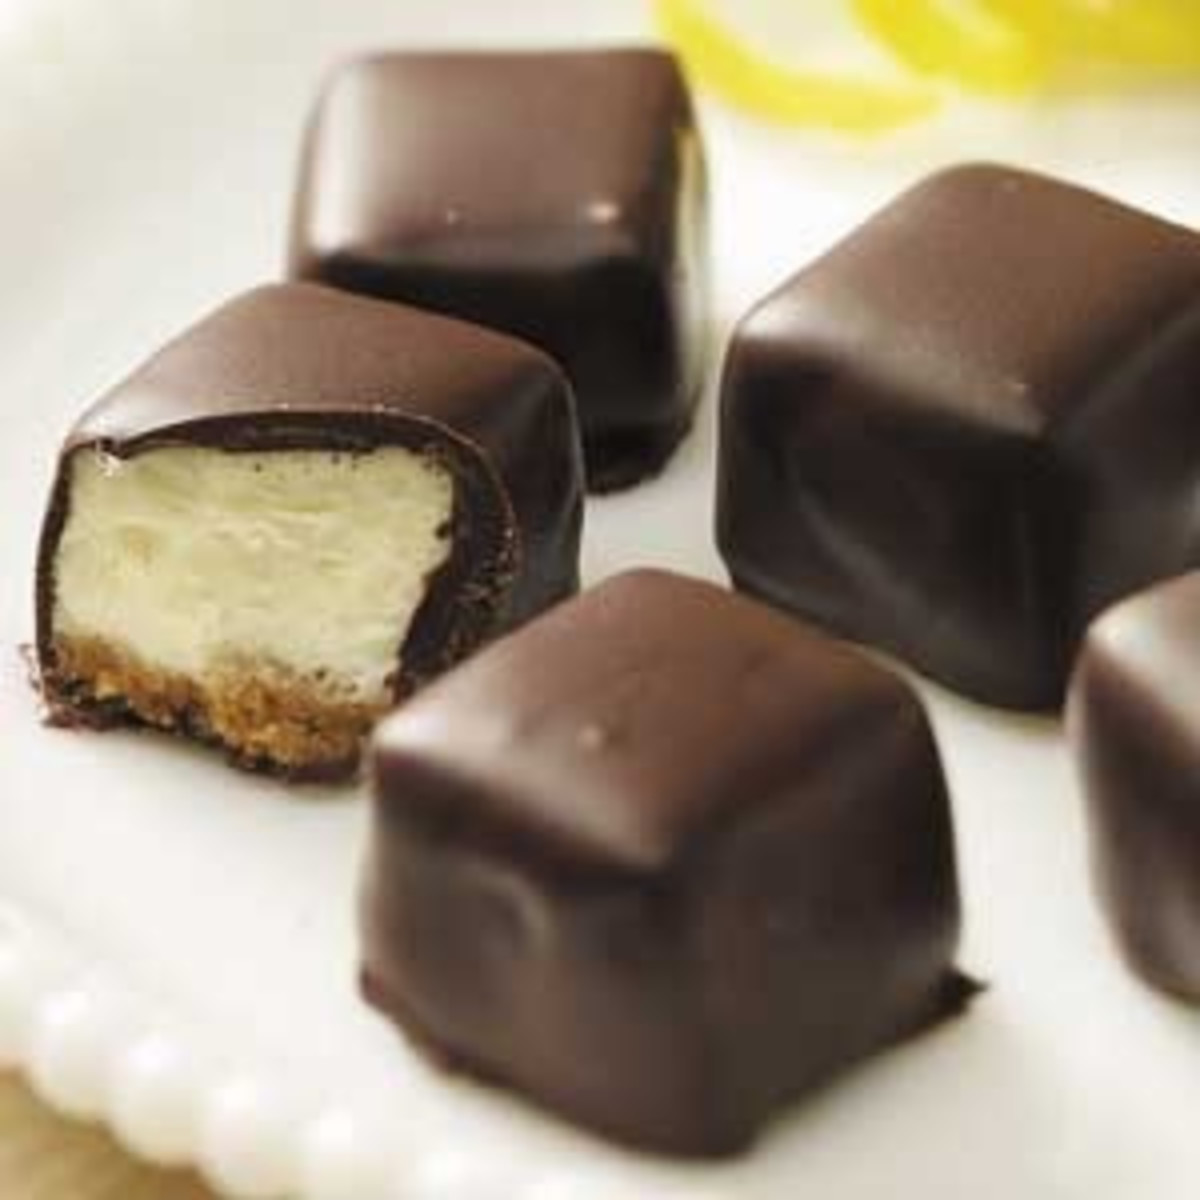 Chocolate covered cheesecake squares.